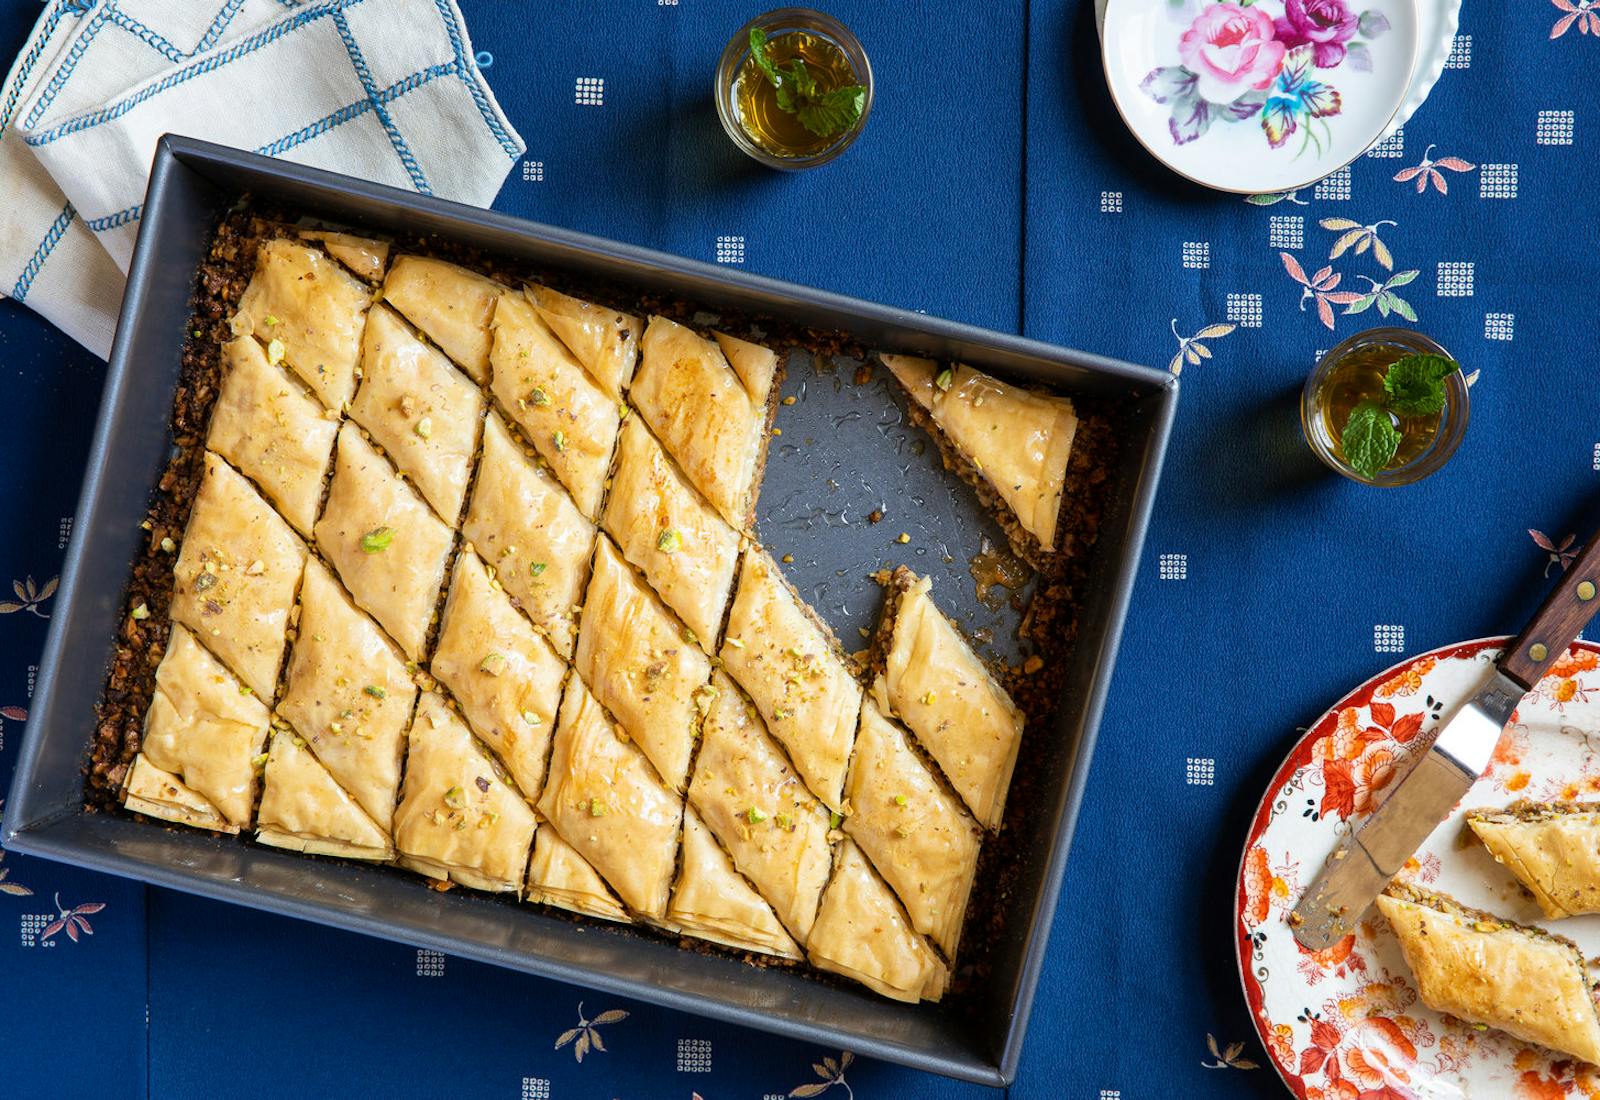 Sliced baklava in pan alongside mint tea, printed napkin and floral serving dishes, atop blue tablecloth.